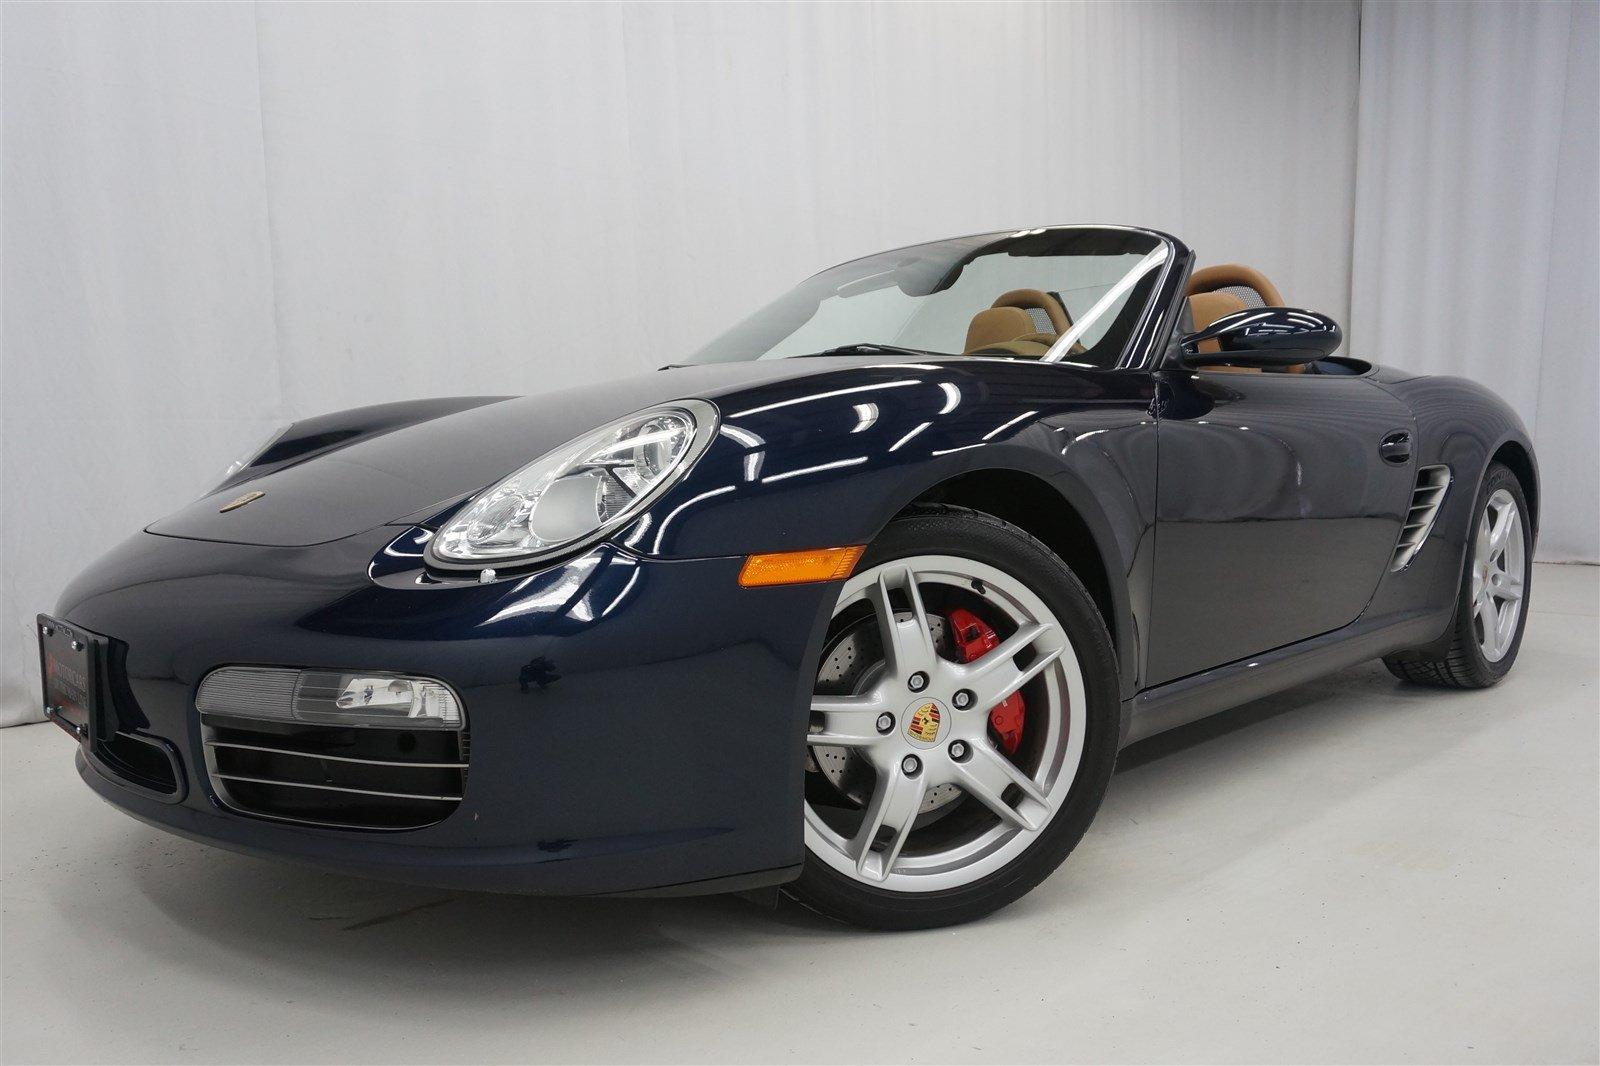 2006 Porsche Boxster S Stock U731574 For Sale Near King Of